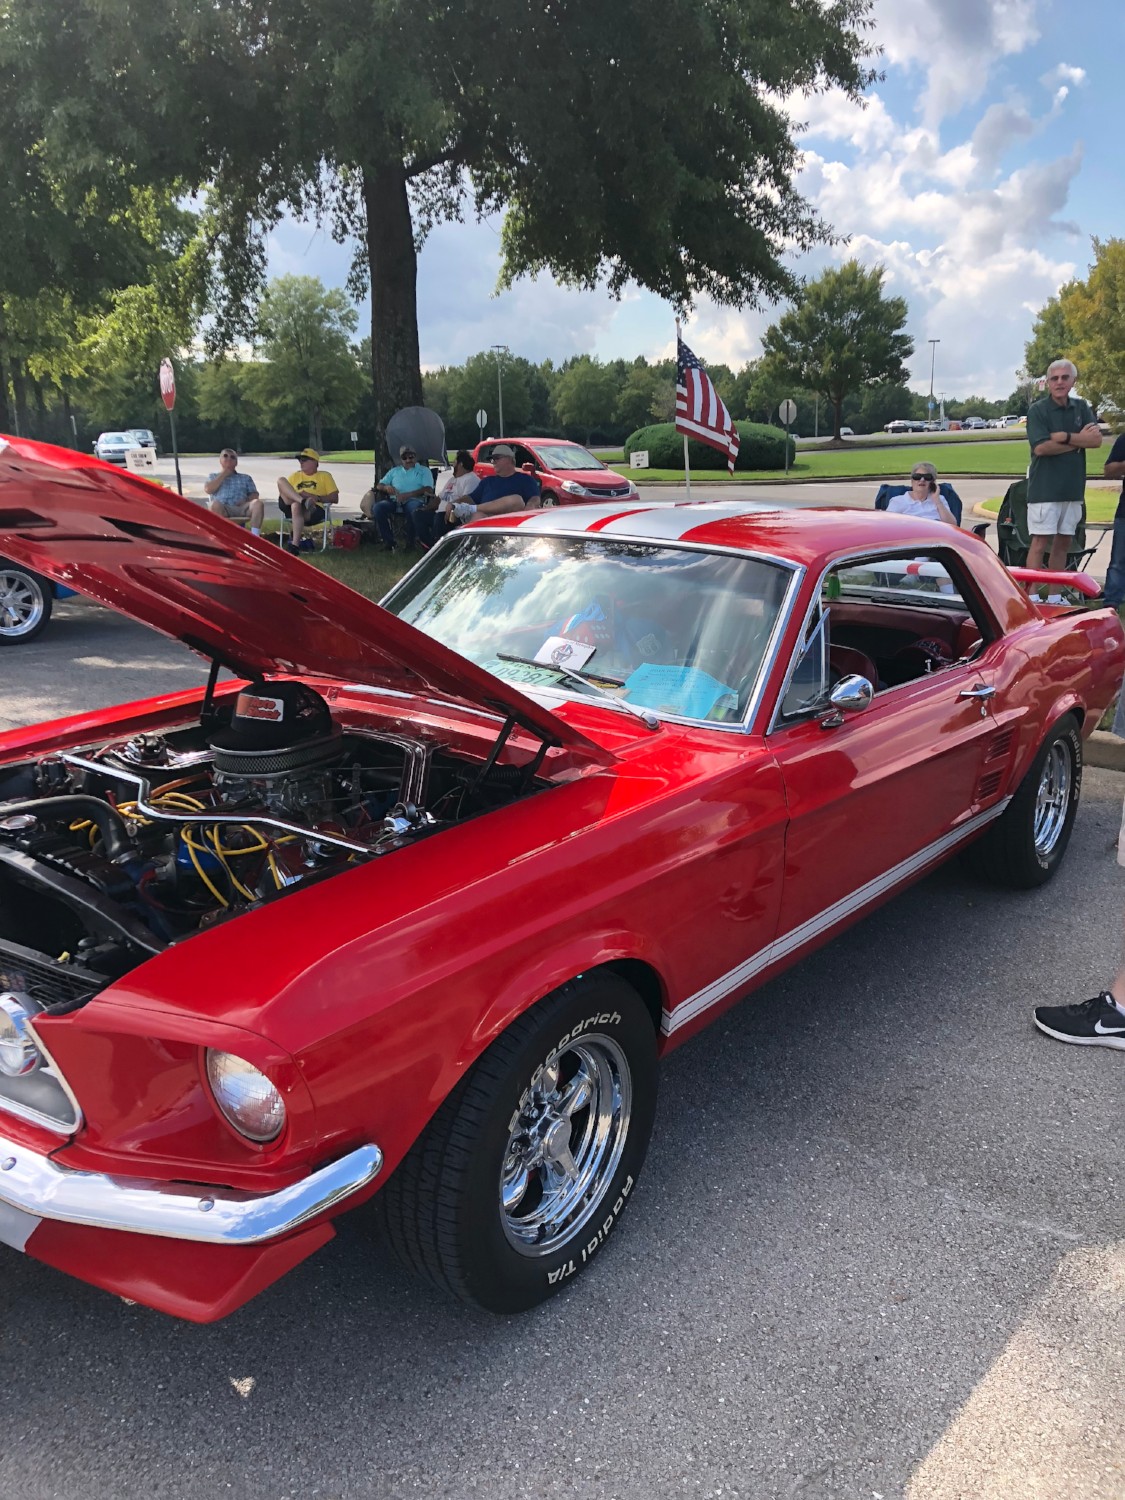 Annual Mustangs of Memphis Auto Show